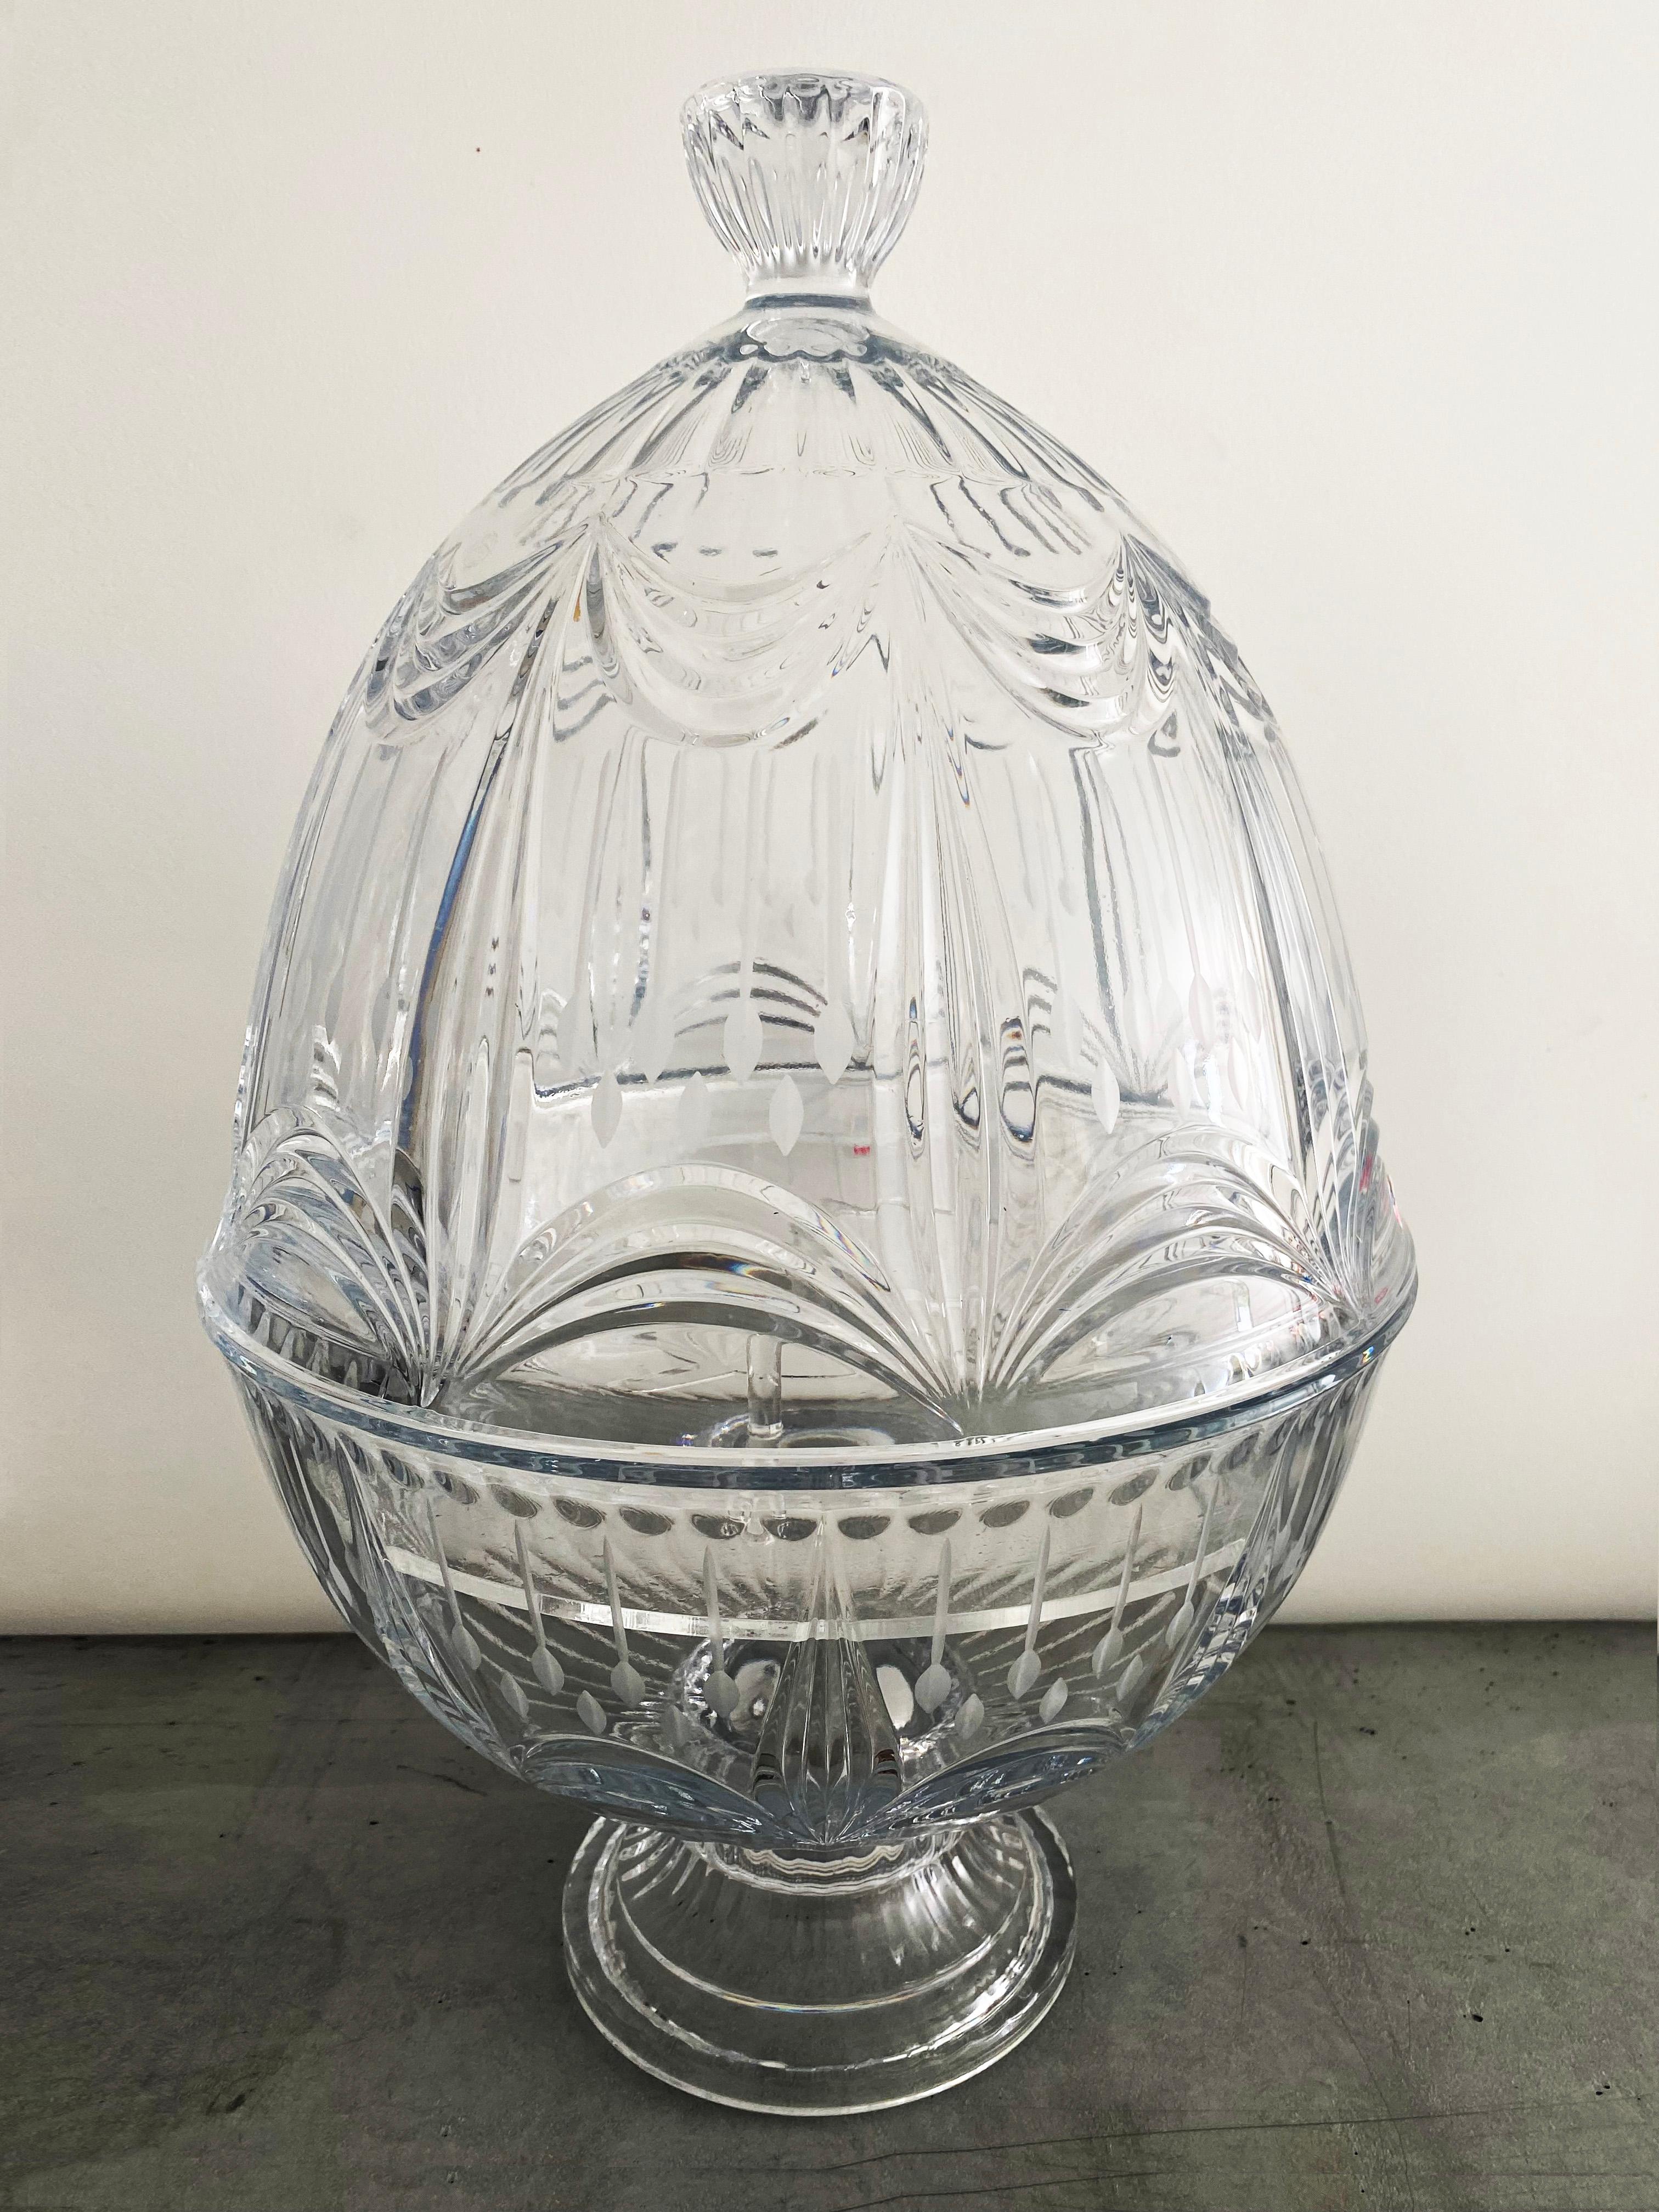 Jacques Chanel
Best craftsman in France 
Hand-made Champagne cellar in 24% lead crystal, bevel cut.
Numbered 71/100
1982
50 cms x 32 diam
mint condition 
900 euros.